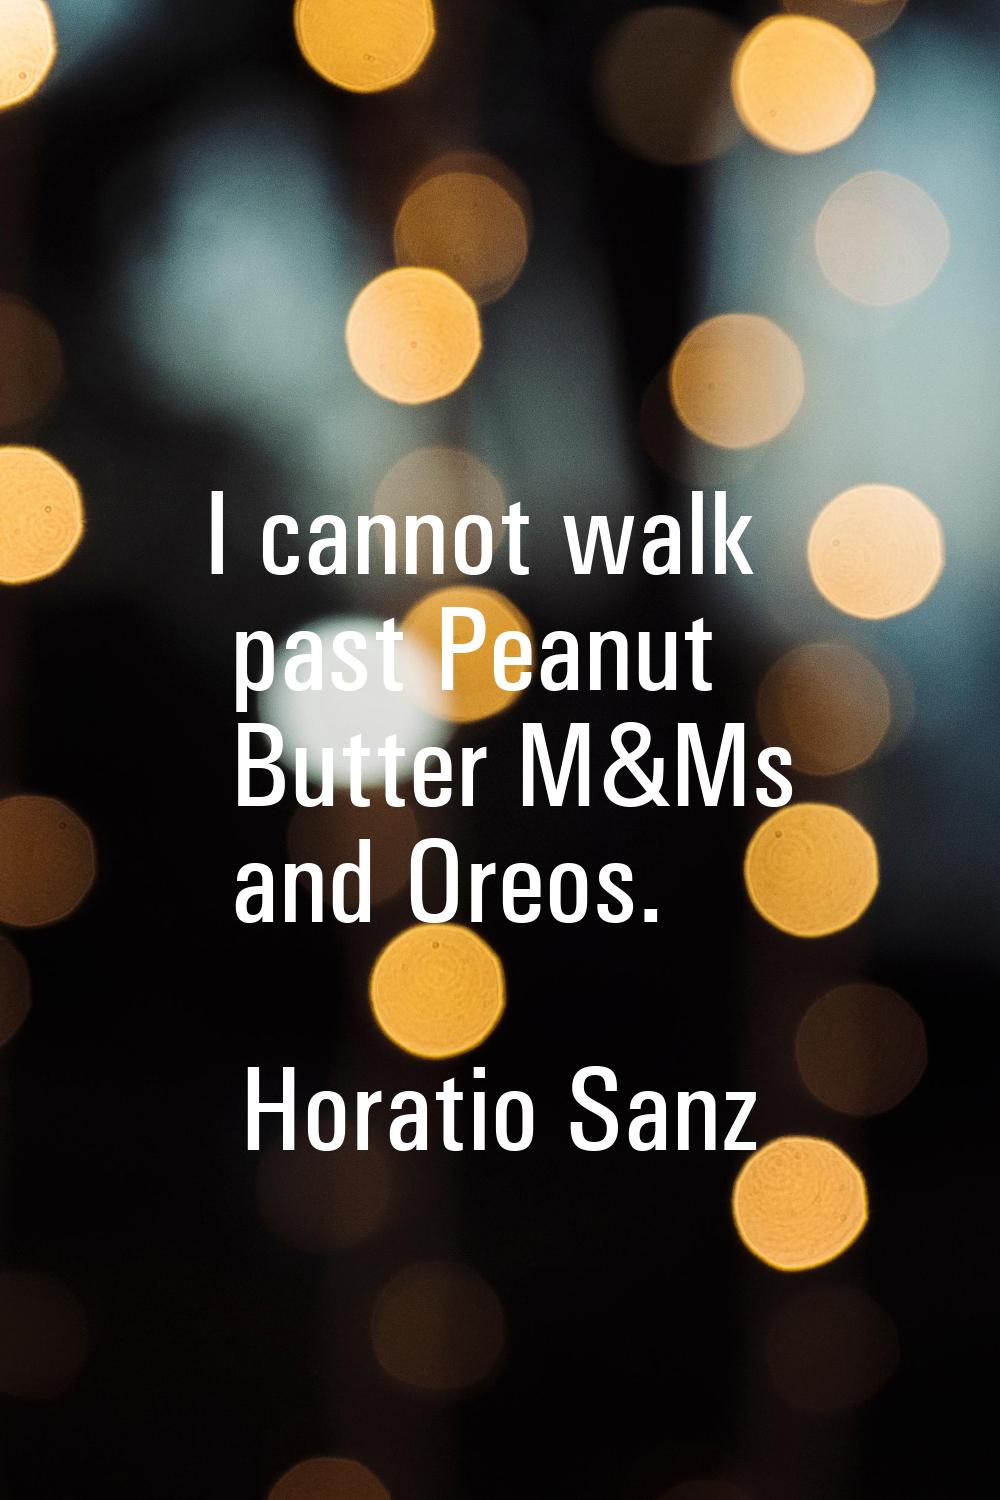 I cannot walk past Peanut Butter M&Ms and Oreos.